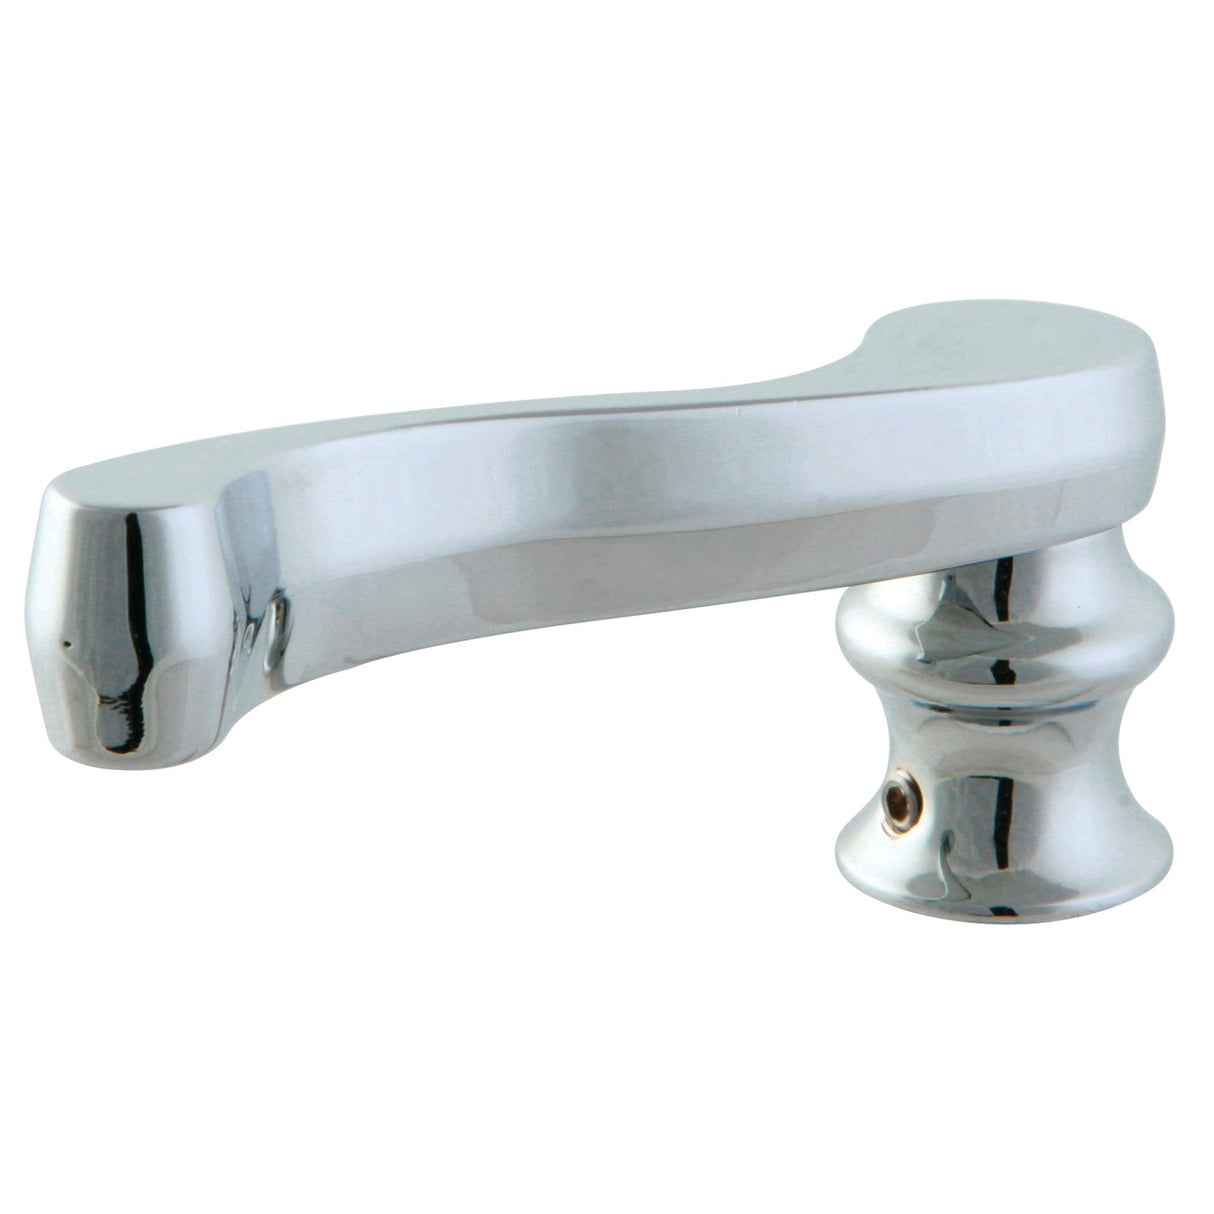 French KTHFL1 Toilet Tank Lever Handle, Polished Chrome